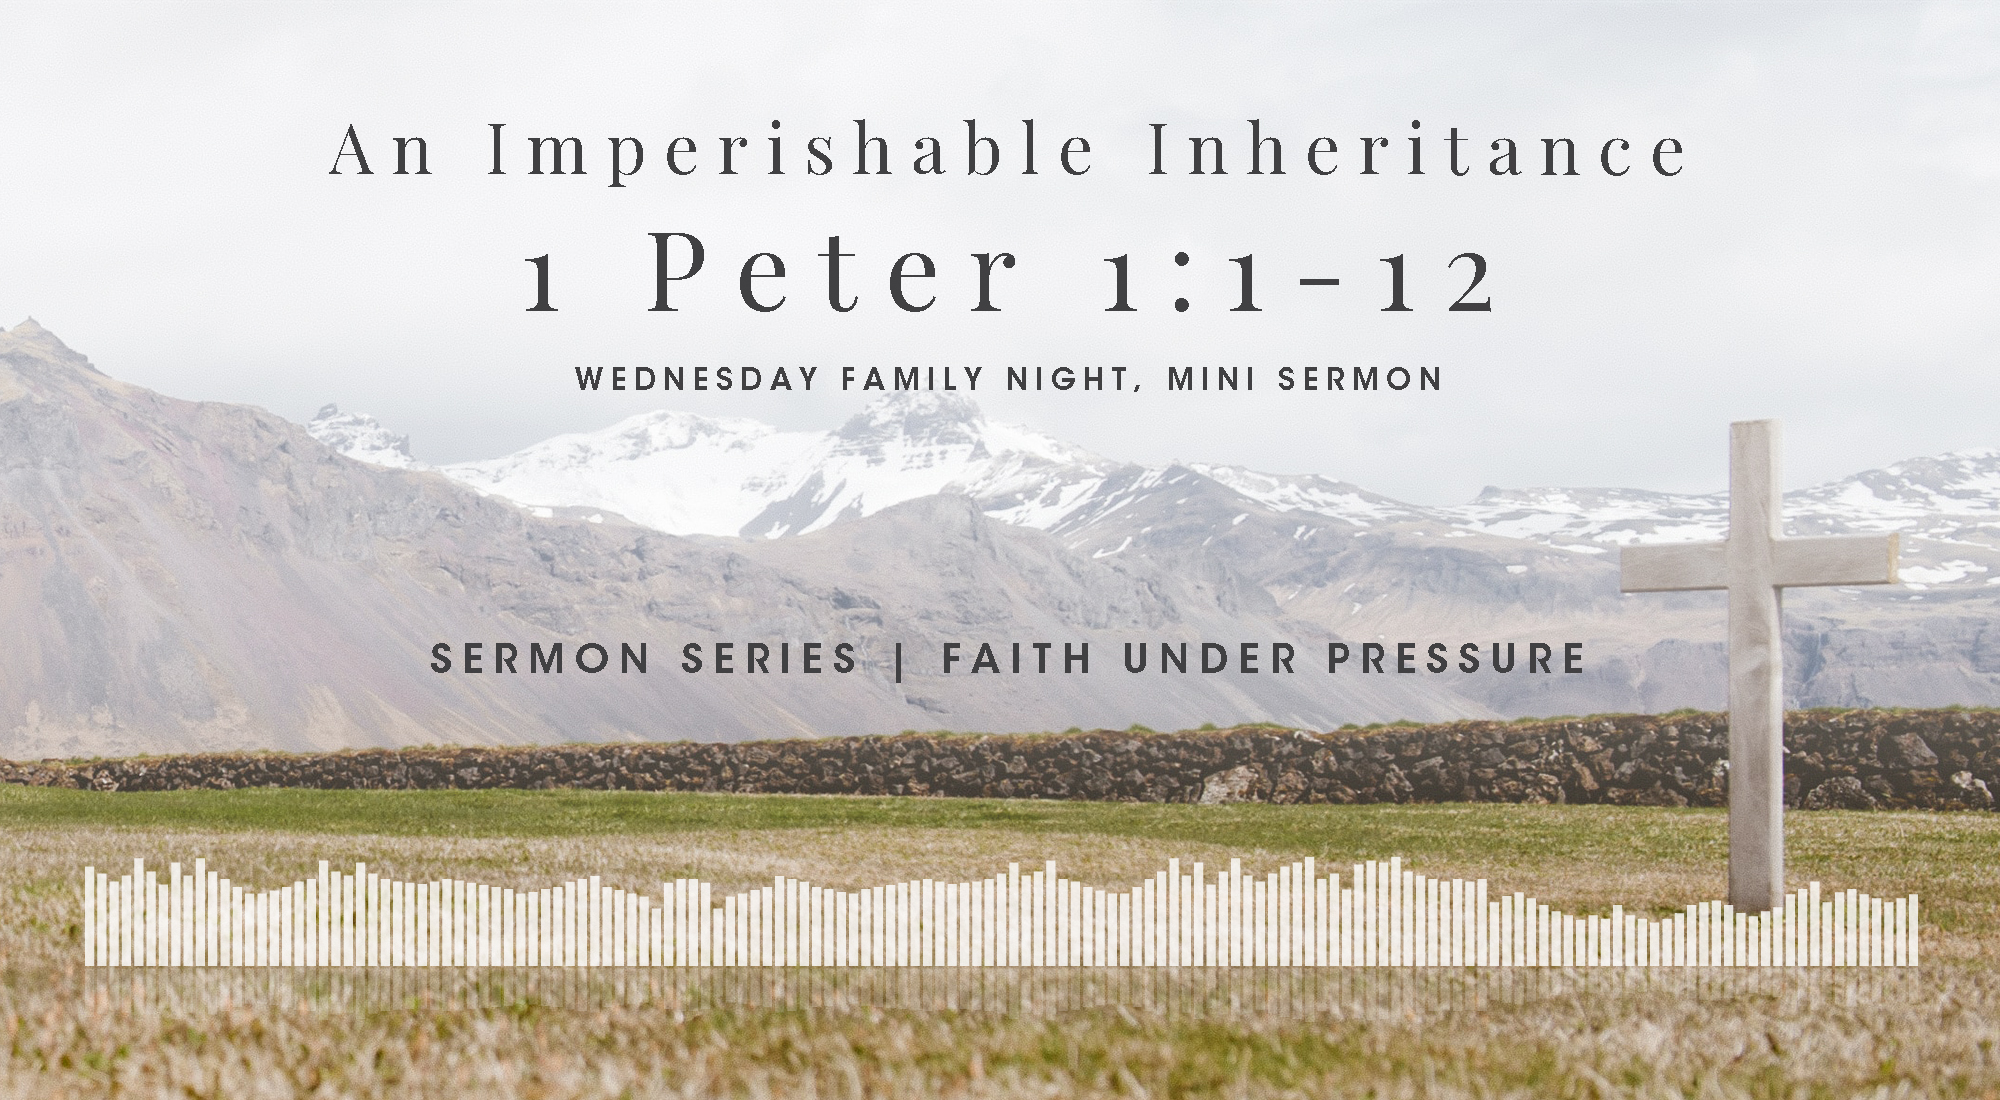 An Imperishable Inheritance, A Mini Bible Study in 1 Peter 1:1-12, From Our Faith Under Pressure Sermon Series, Wyandotte County Christian Church Wednesday Family Night